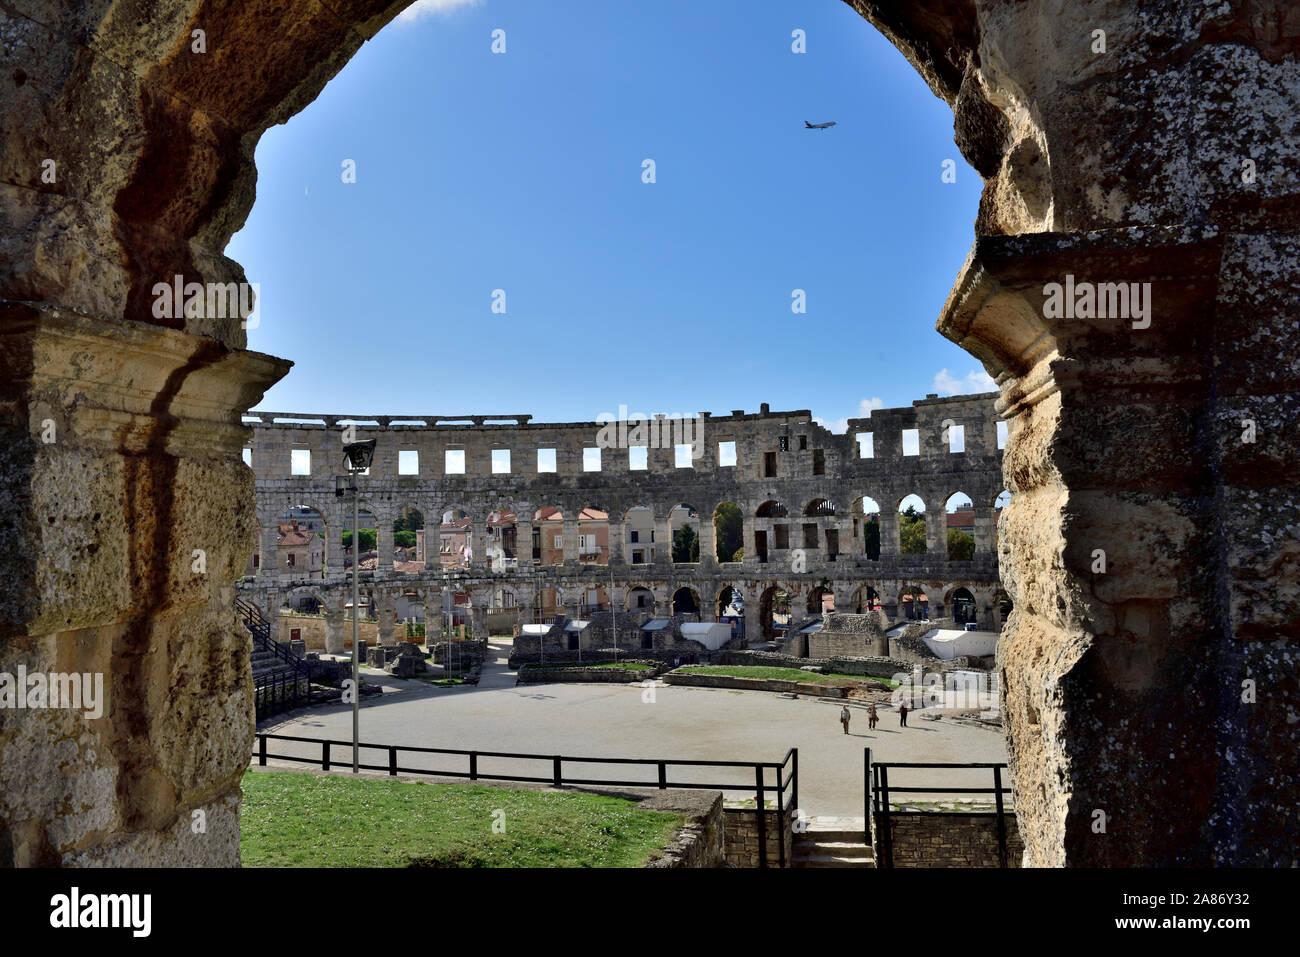 Ancient Pula Roman amphitheatre in the city centre, looking through archway, Croatia Stock Photo